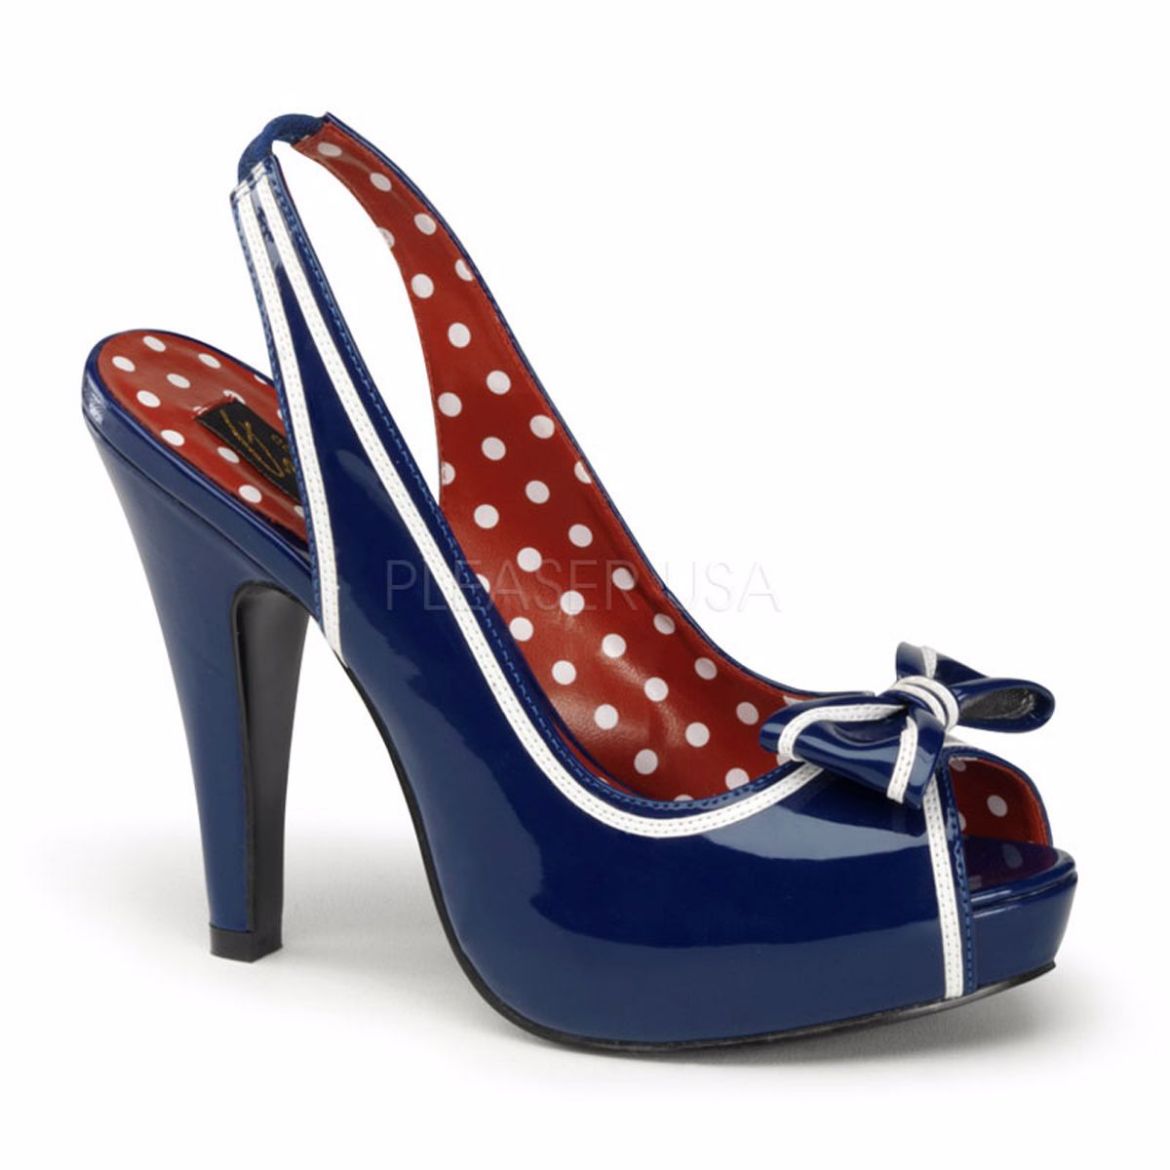 Product image of Pin Up Couture Bettie-05 Navy Blue Patent, 4 1/2 inch (11.4 cm) Heel, 1 inch (2.5 cm) Platform Sandal Shoes